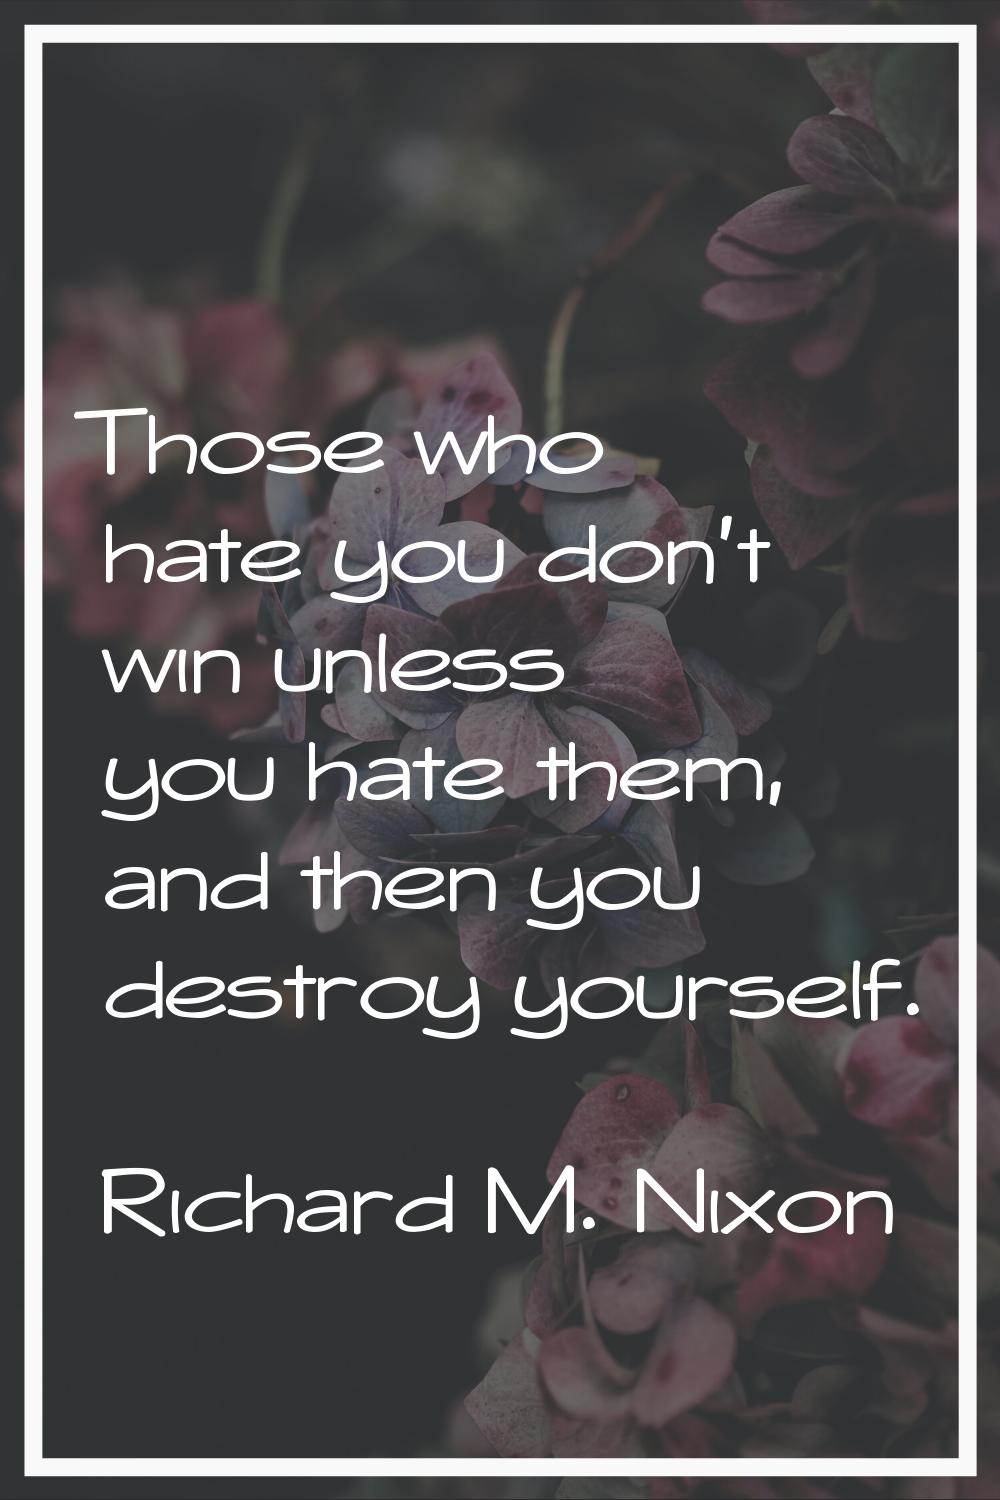 Those who hate you don't win unless you hate them, and then you destroy yourself.